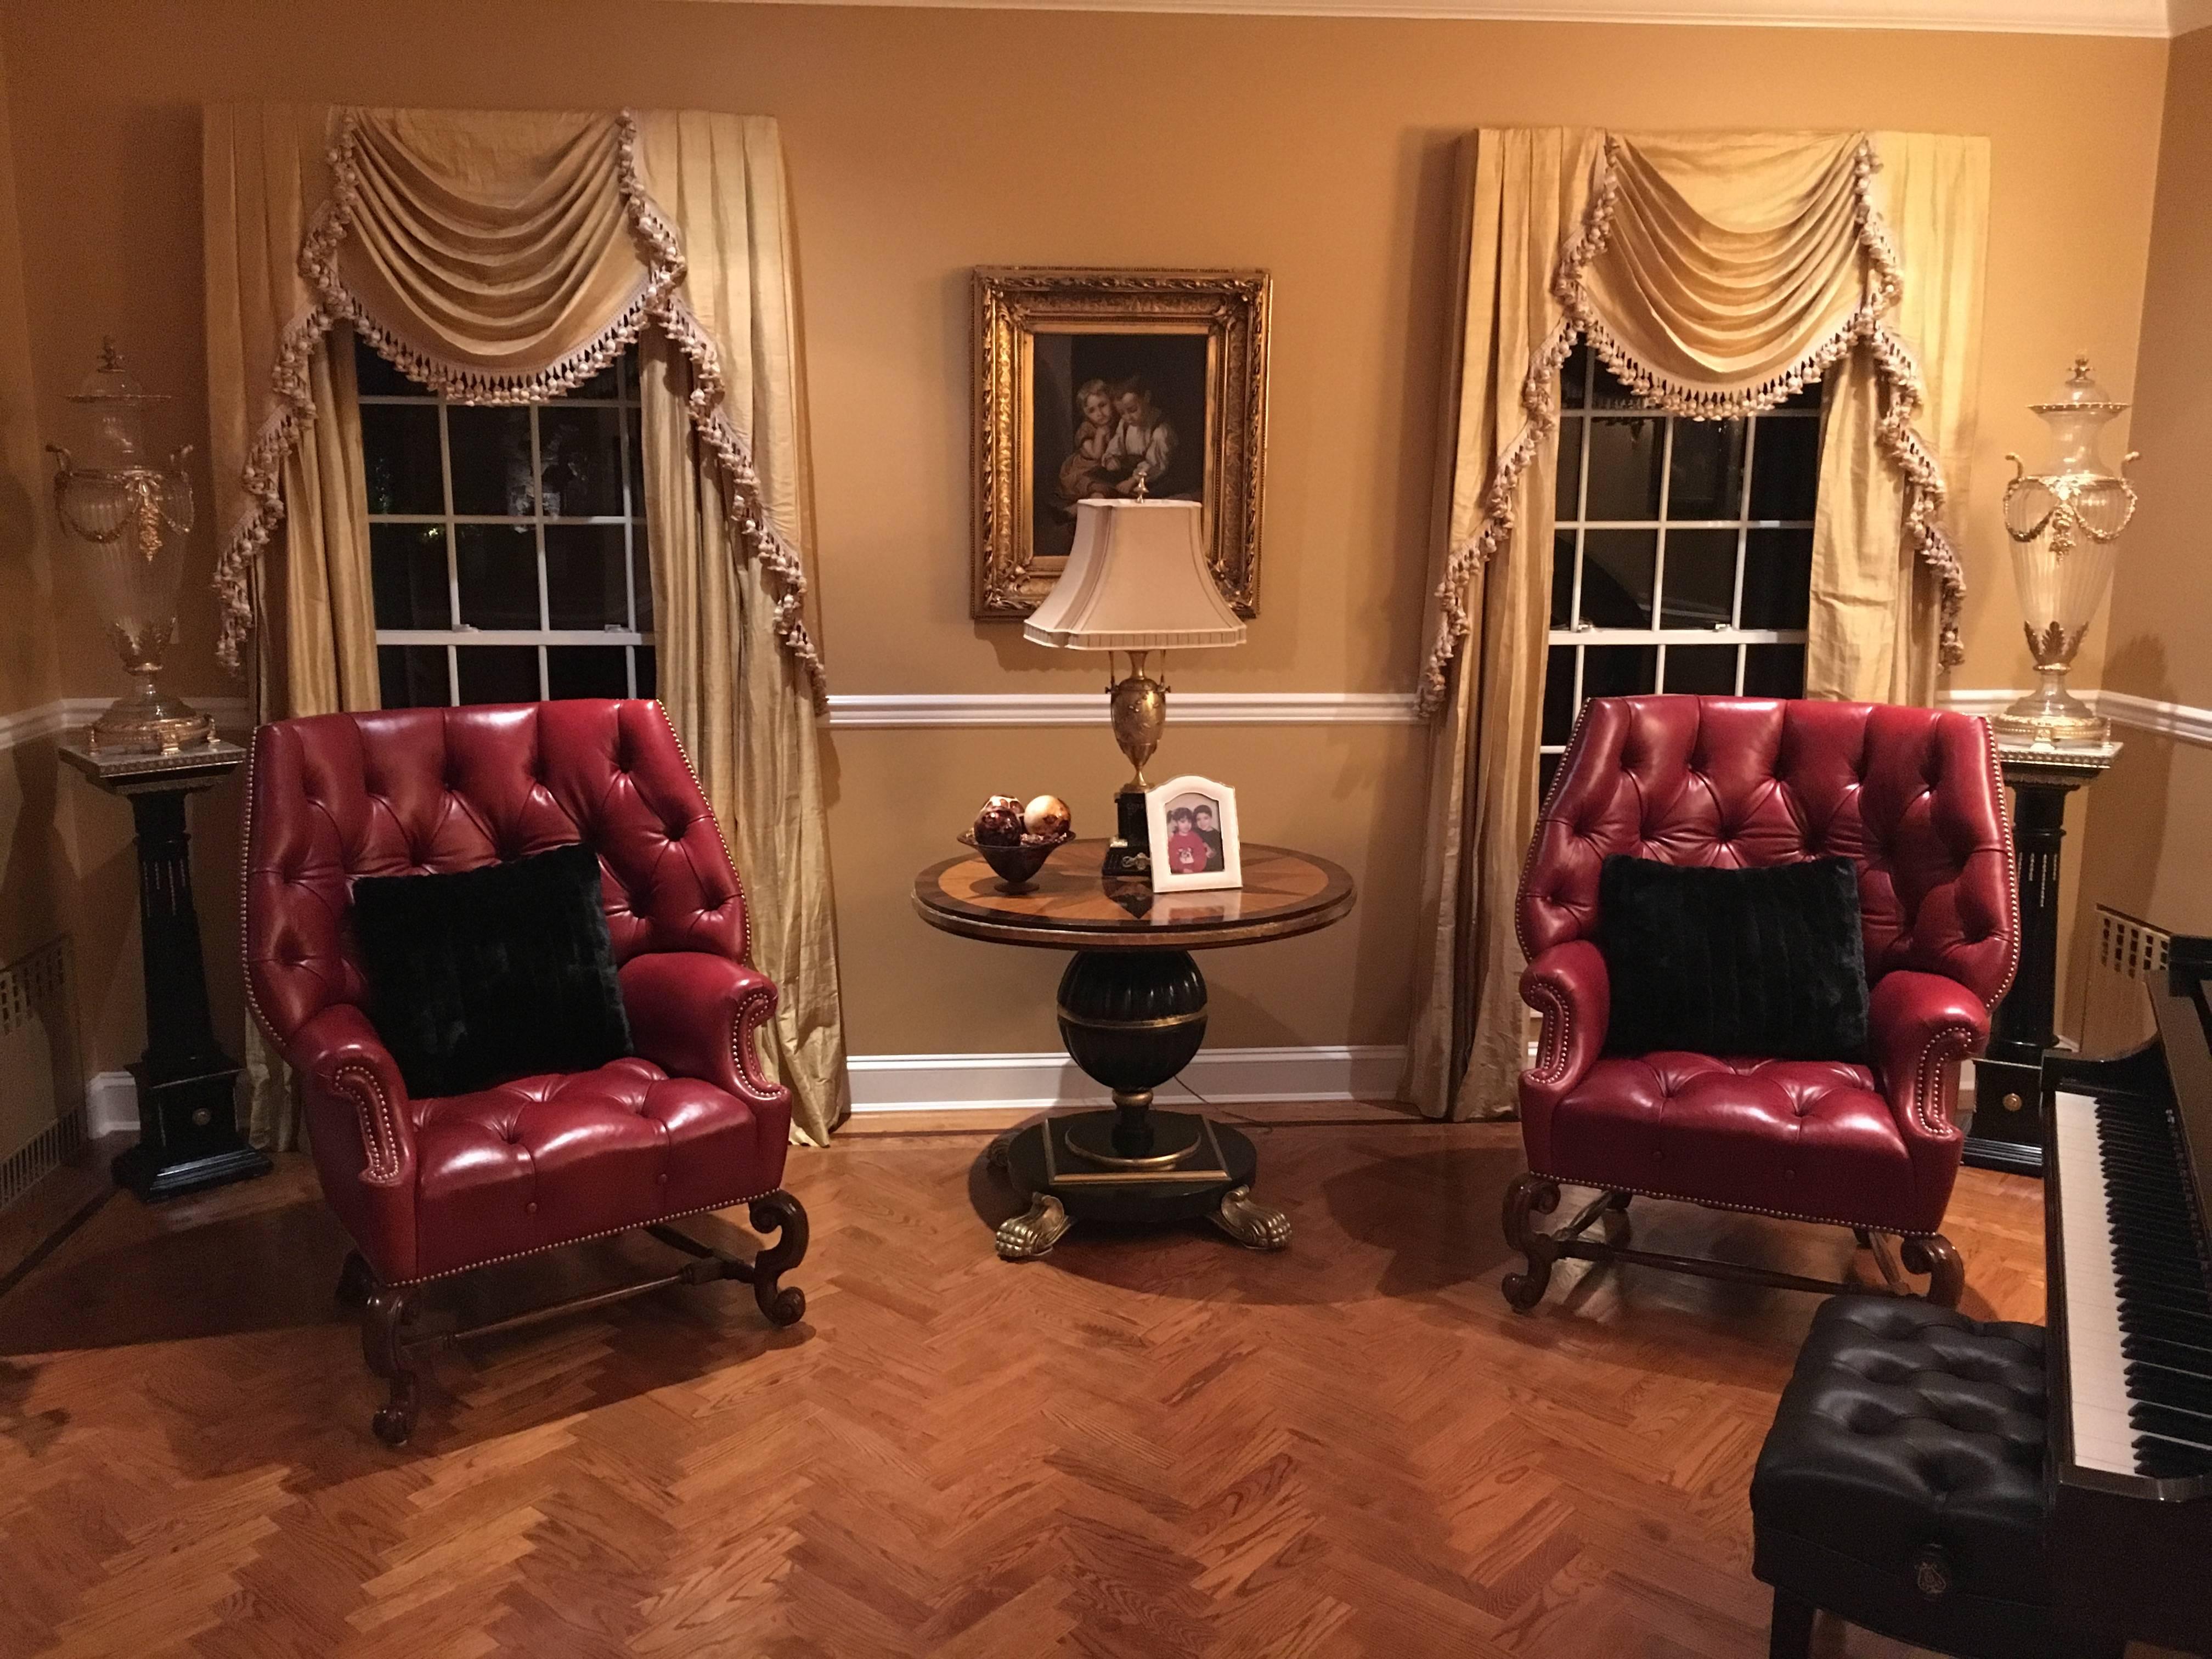 Pair of oversized tufted leather wingback chairs. Simply the finest custom quality leather bow back chairs sitting on walnut solid carved frames with barley twisted undercarriages. The wide back and seats having enormous comfort and room. Fully